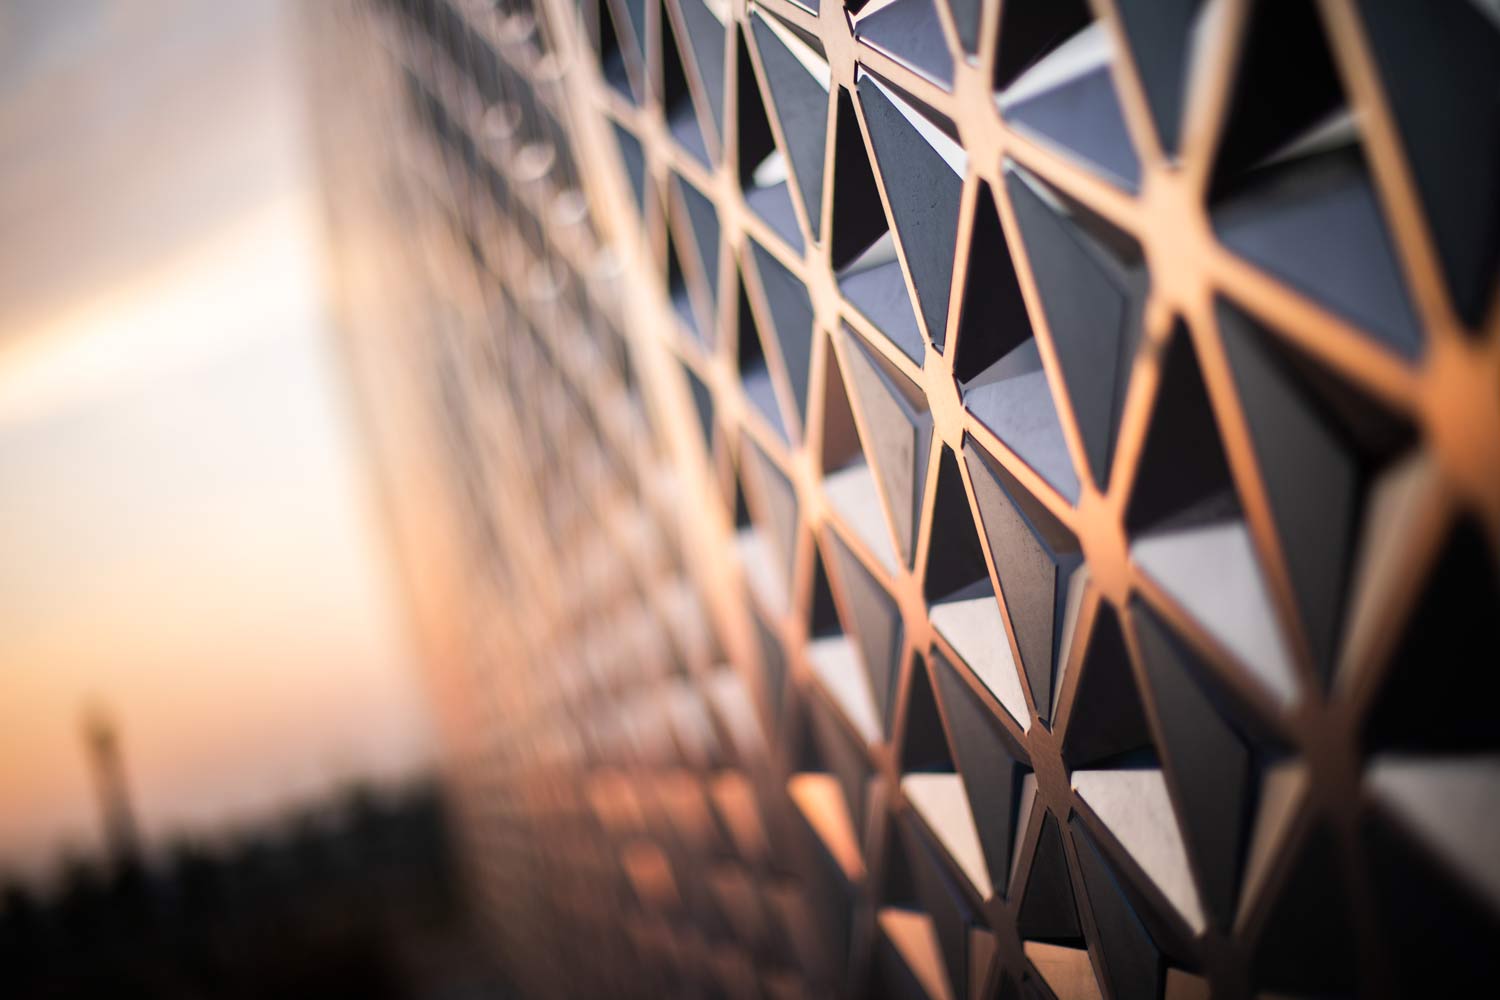 Vivid orange light paints a screen wall that is cut with an intricate pattern.